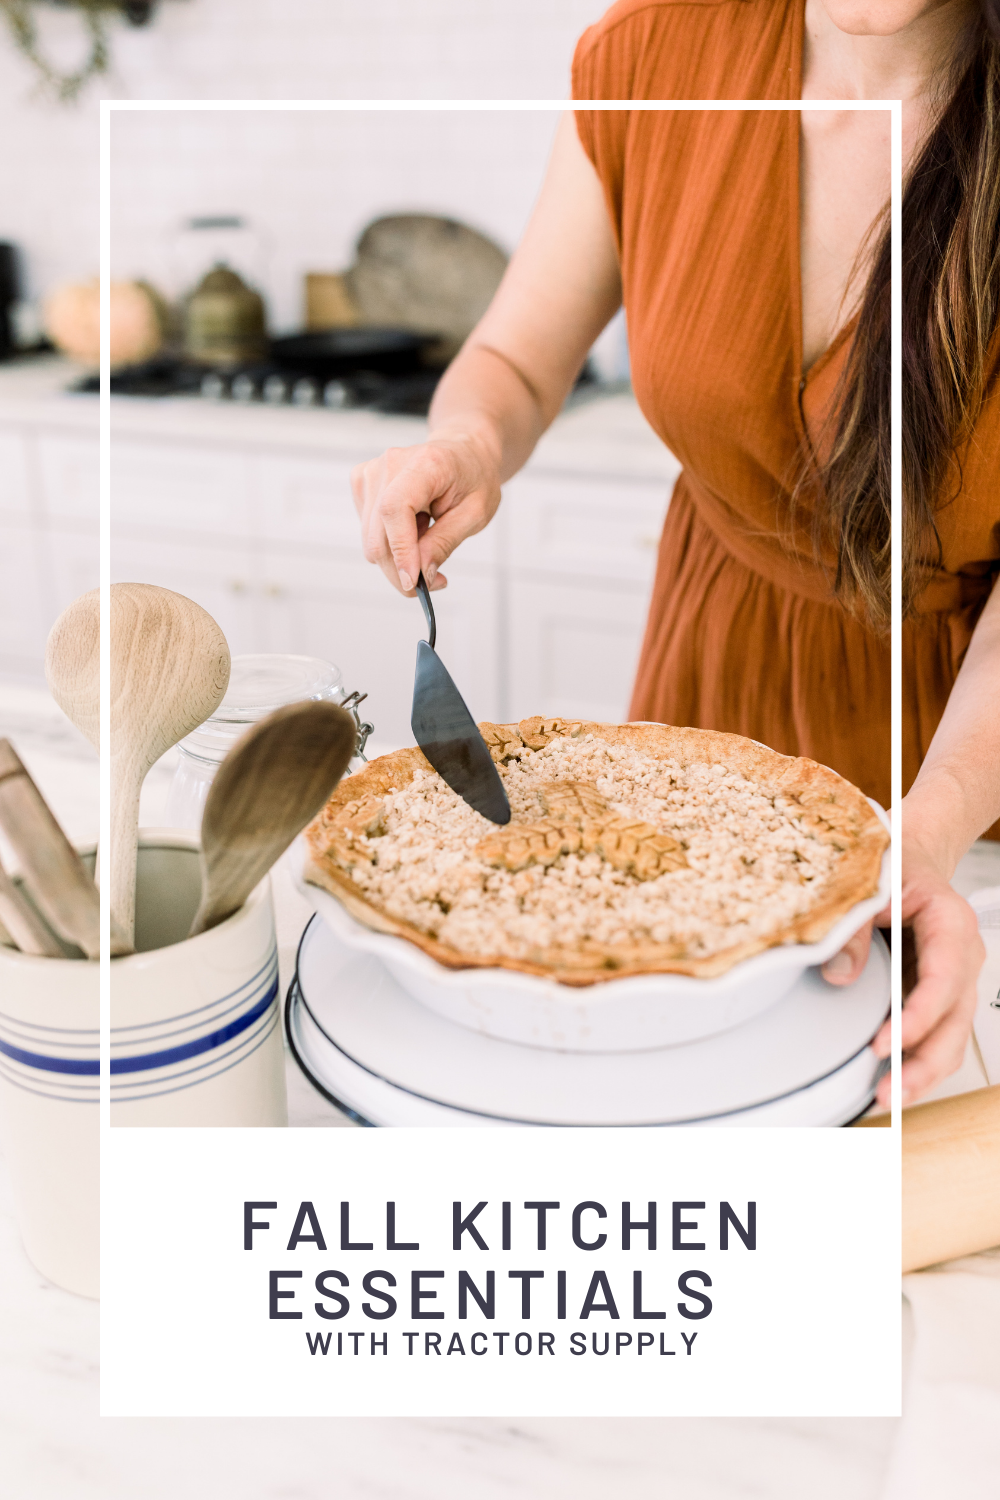 Fall Kitchen essentials with Tractor Supply - Azure Farm